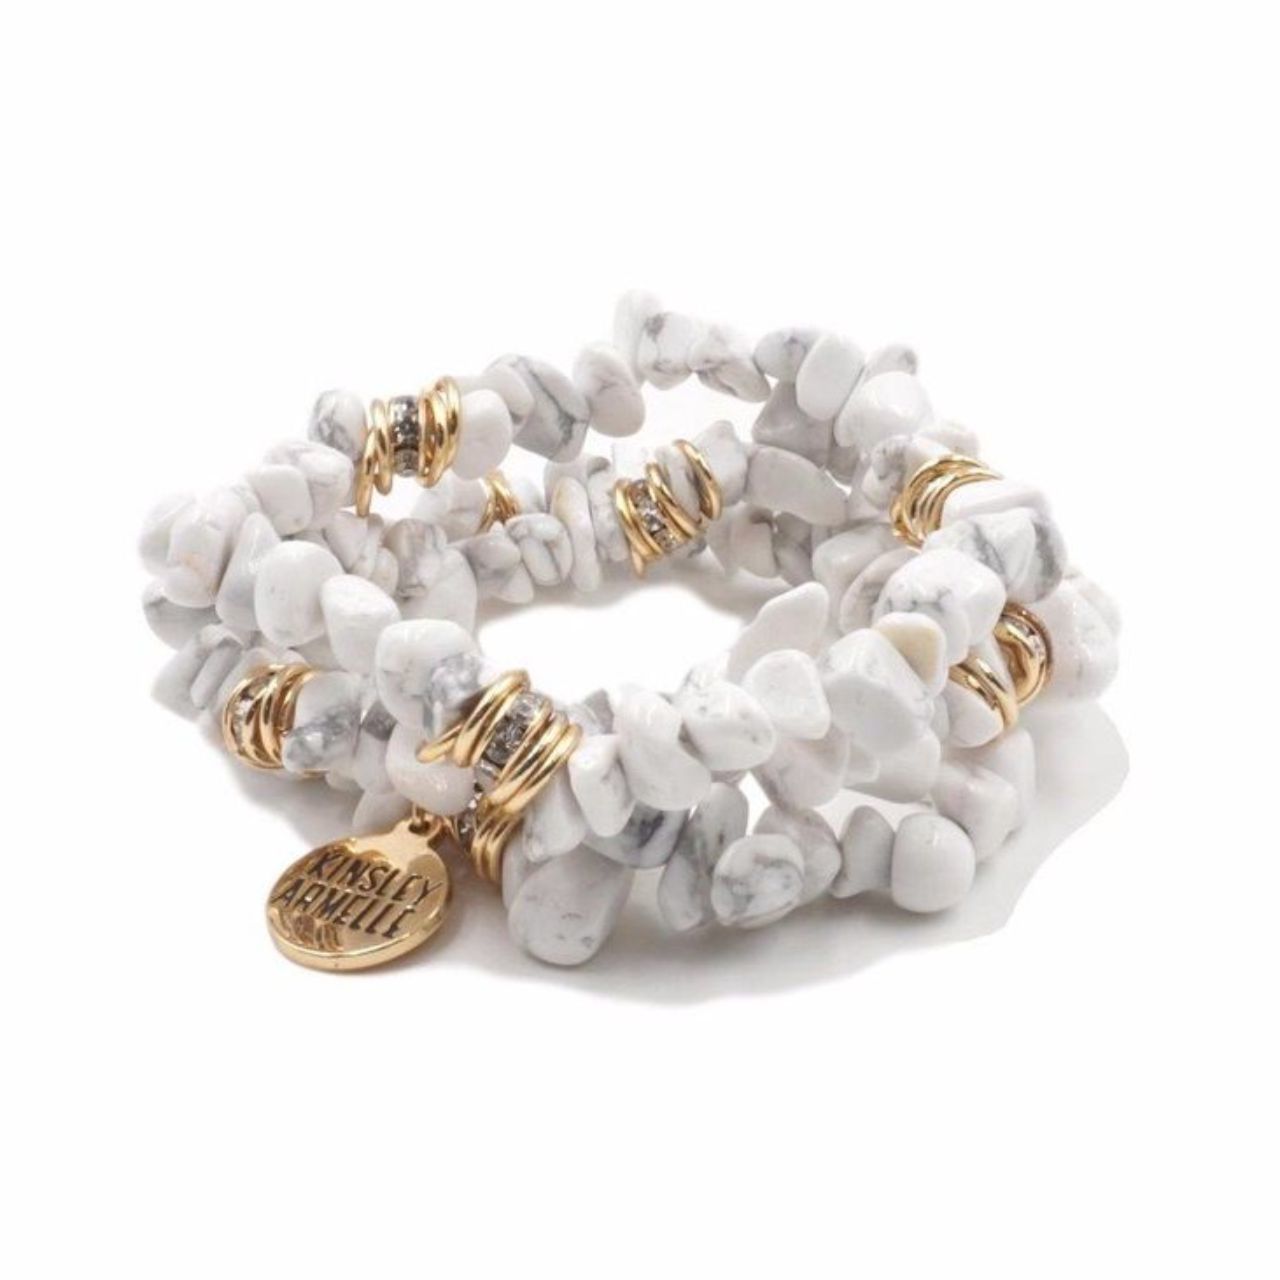 Kinsley Armelle - Pepper Cluster Bracelet with Gold Detail - The Graphic Tee